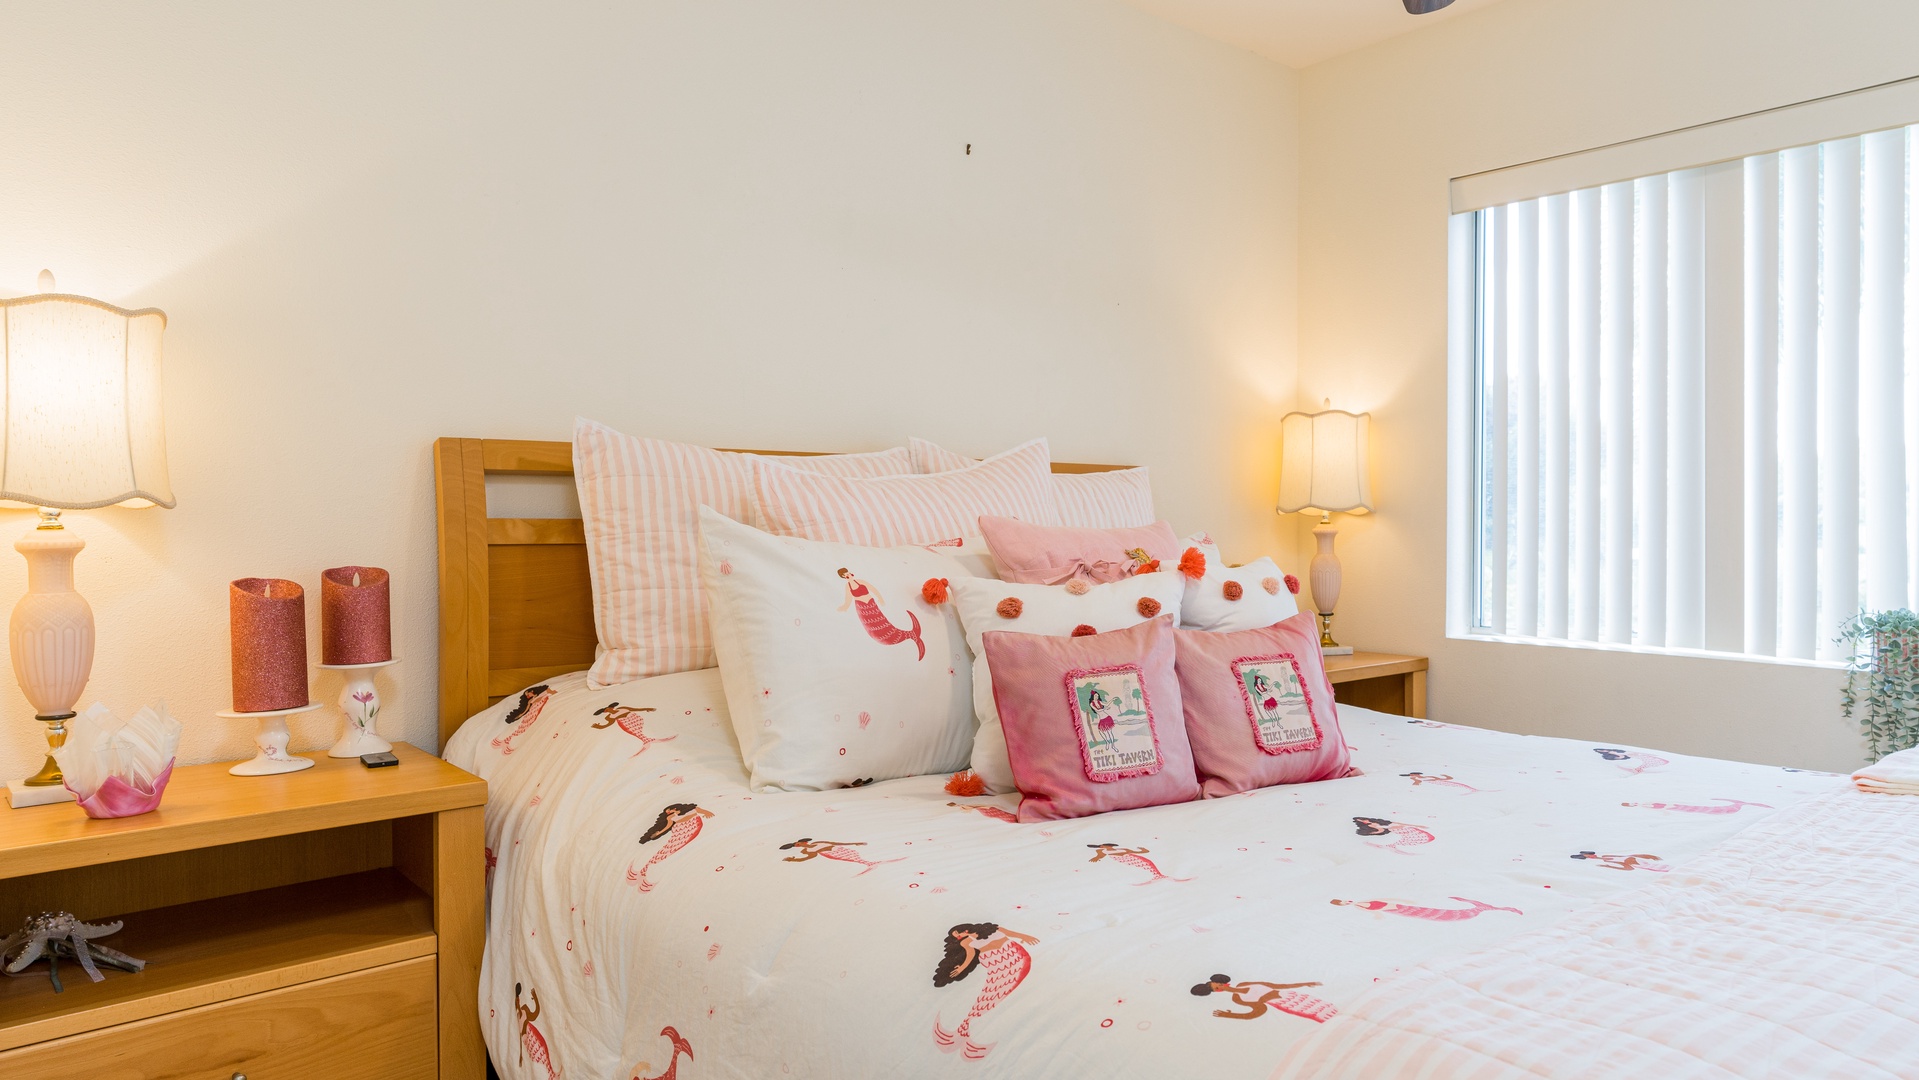 Kapolei Vacation Rentals, Fairways at Ko Olina 4A - The second guest bedroom is brightly decorated with soft patterns and linens.